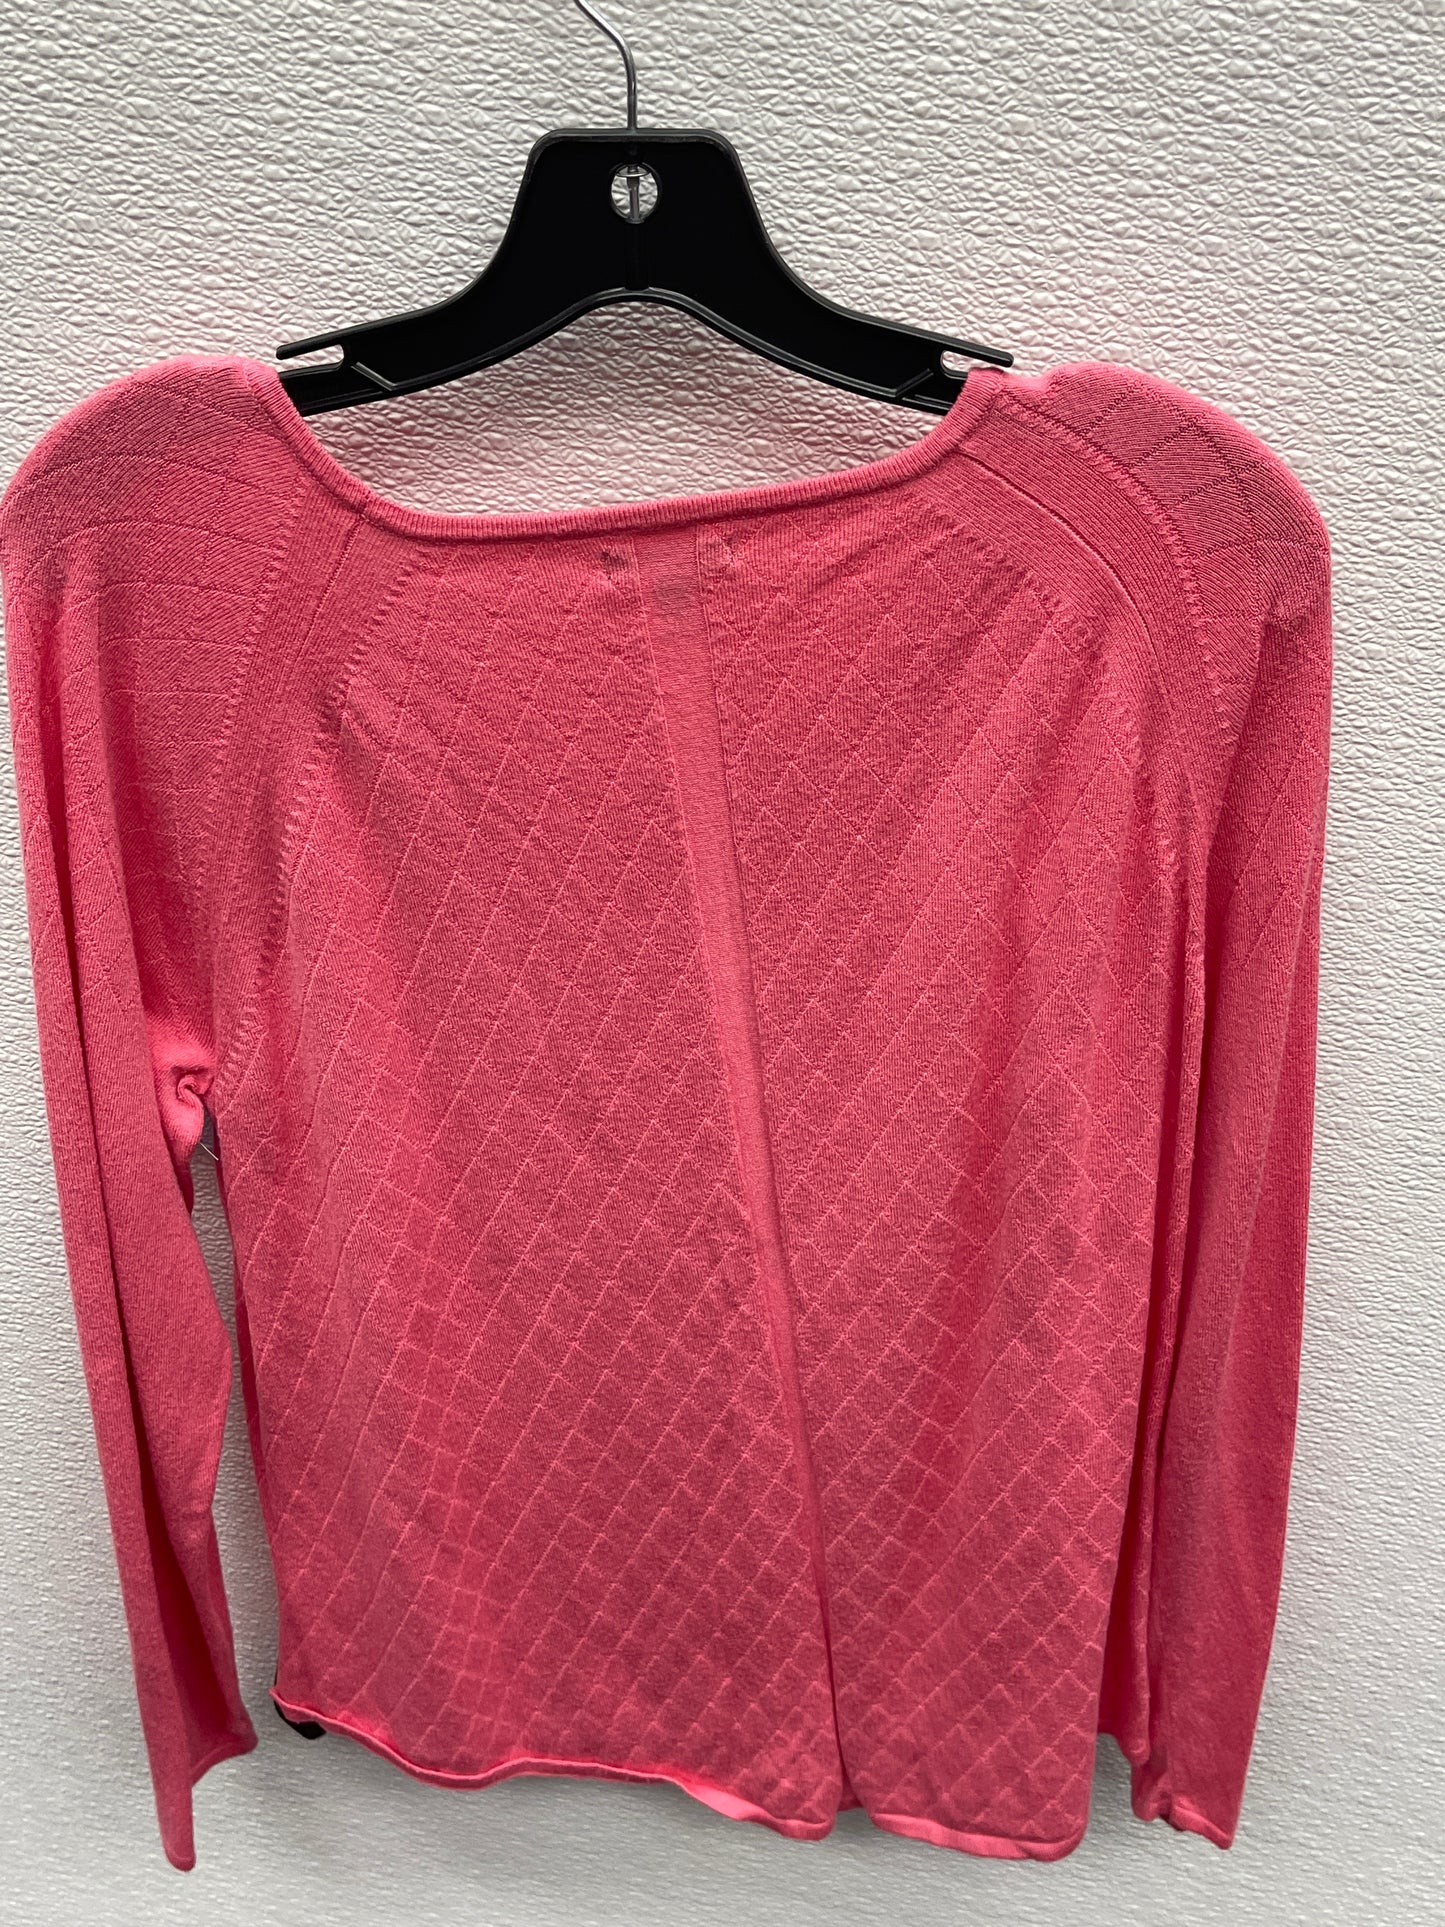 Top Long Sleeve By Apt 9  Size: Petite   Xl